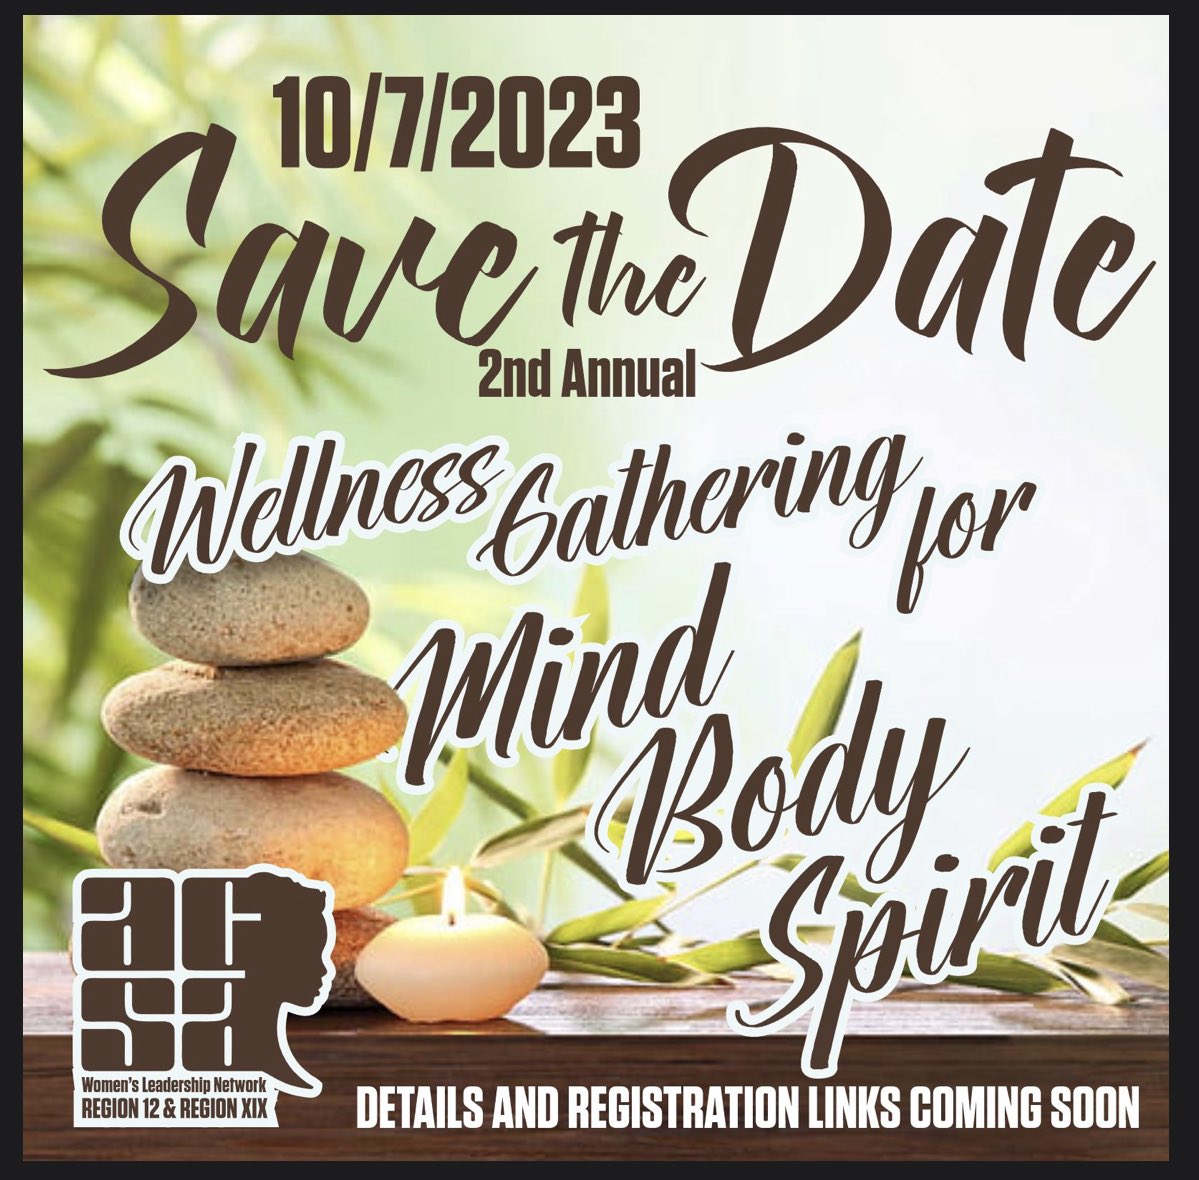 Mark your calendars @ACSARegion12 and @ACSARegionXIX for the 2nd annual #WLNstrong Wellness Gathering on Sat 10/7. Registration details coming soon! @yarbroughshelly @mollylarge @Judy_Servin @ProfeMsVgodinez @PrincipalRoRod @DiocelinaBelle @FUSD_Supt @DrJBourgeois @JUSDRosaSLee